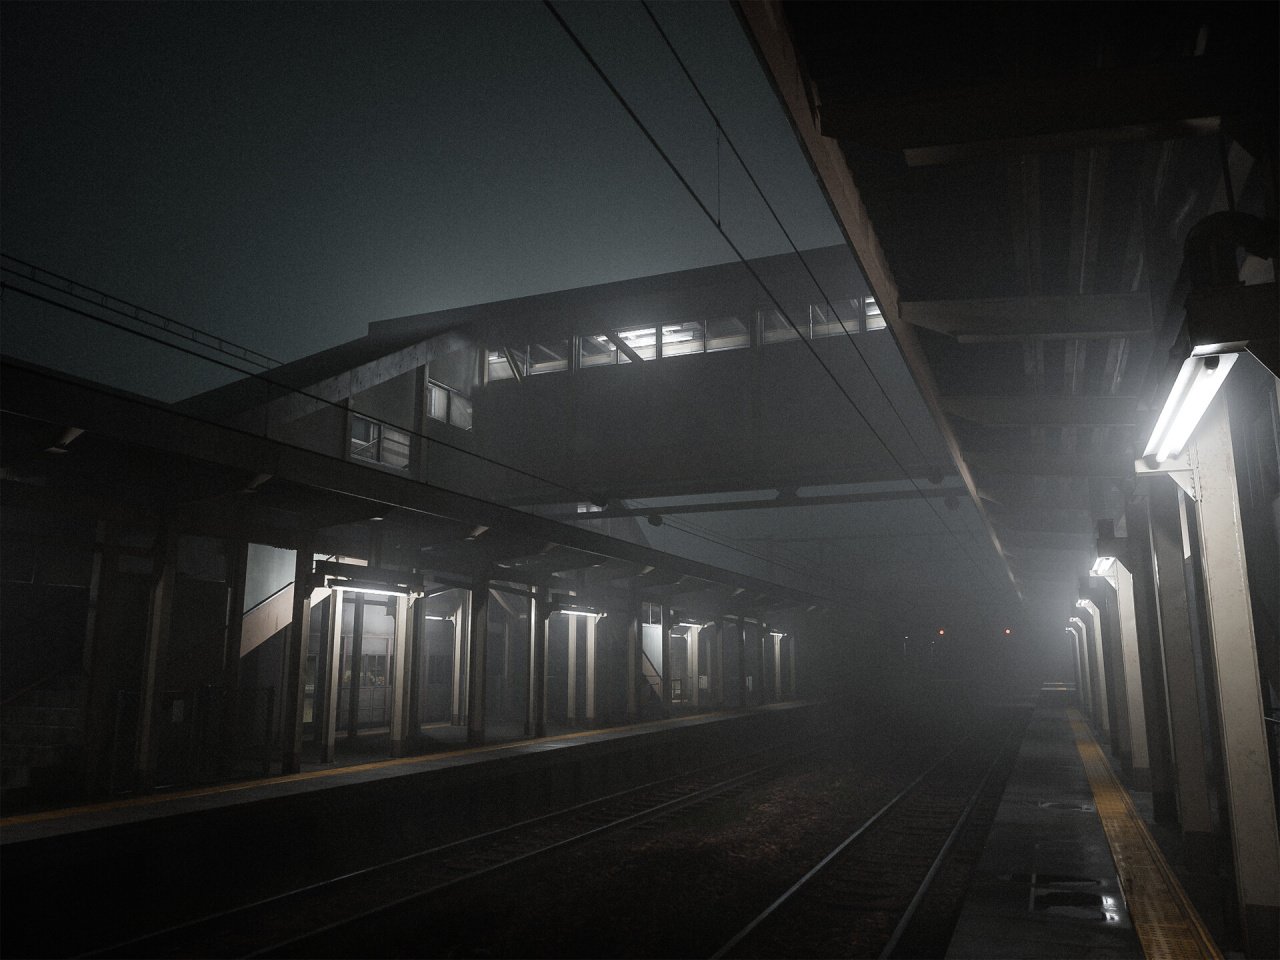 PS5 fans hope the mind-blowing Unreal Engine 5 demo is a glimpse of the future 4